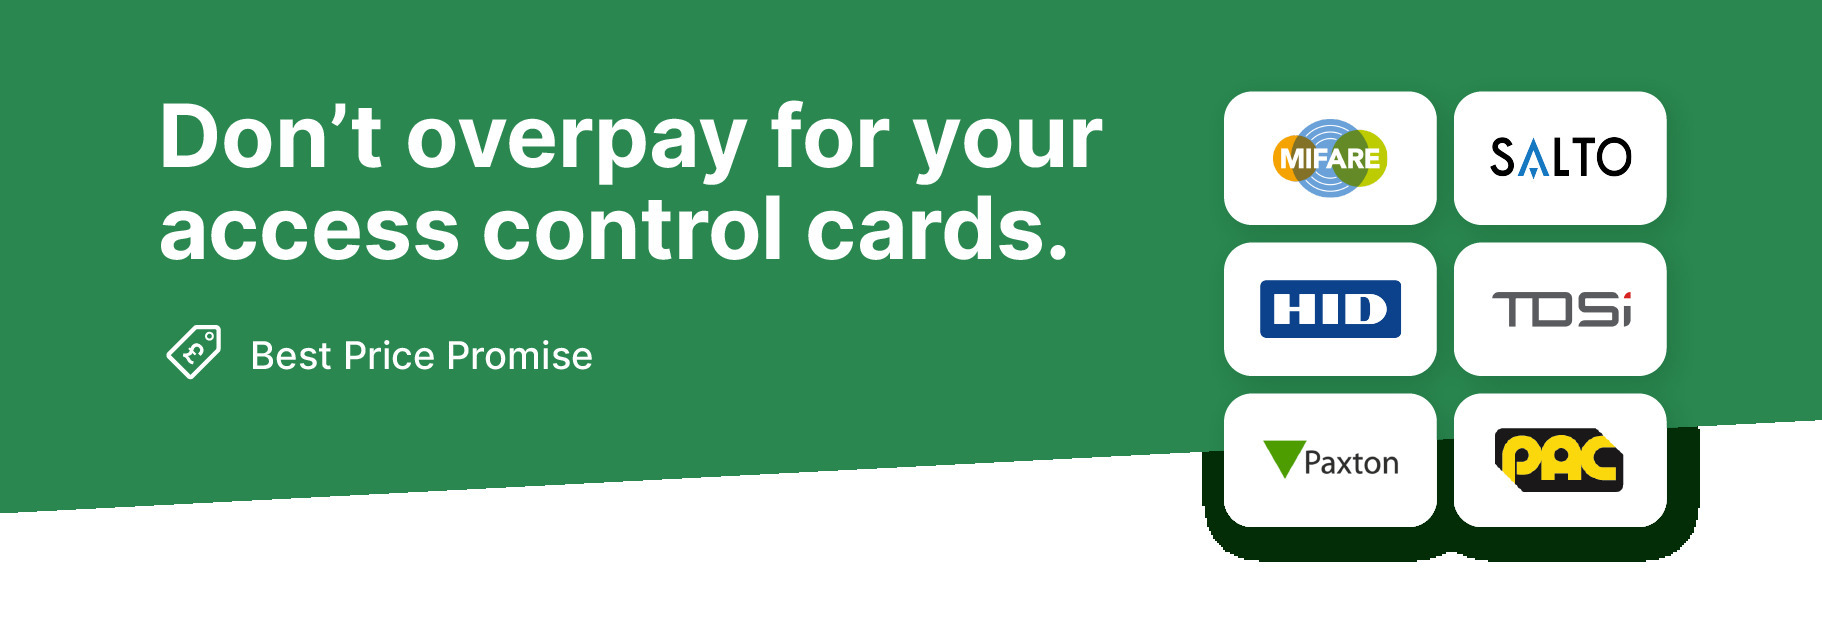 Don't overpay for your access control cards. 